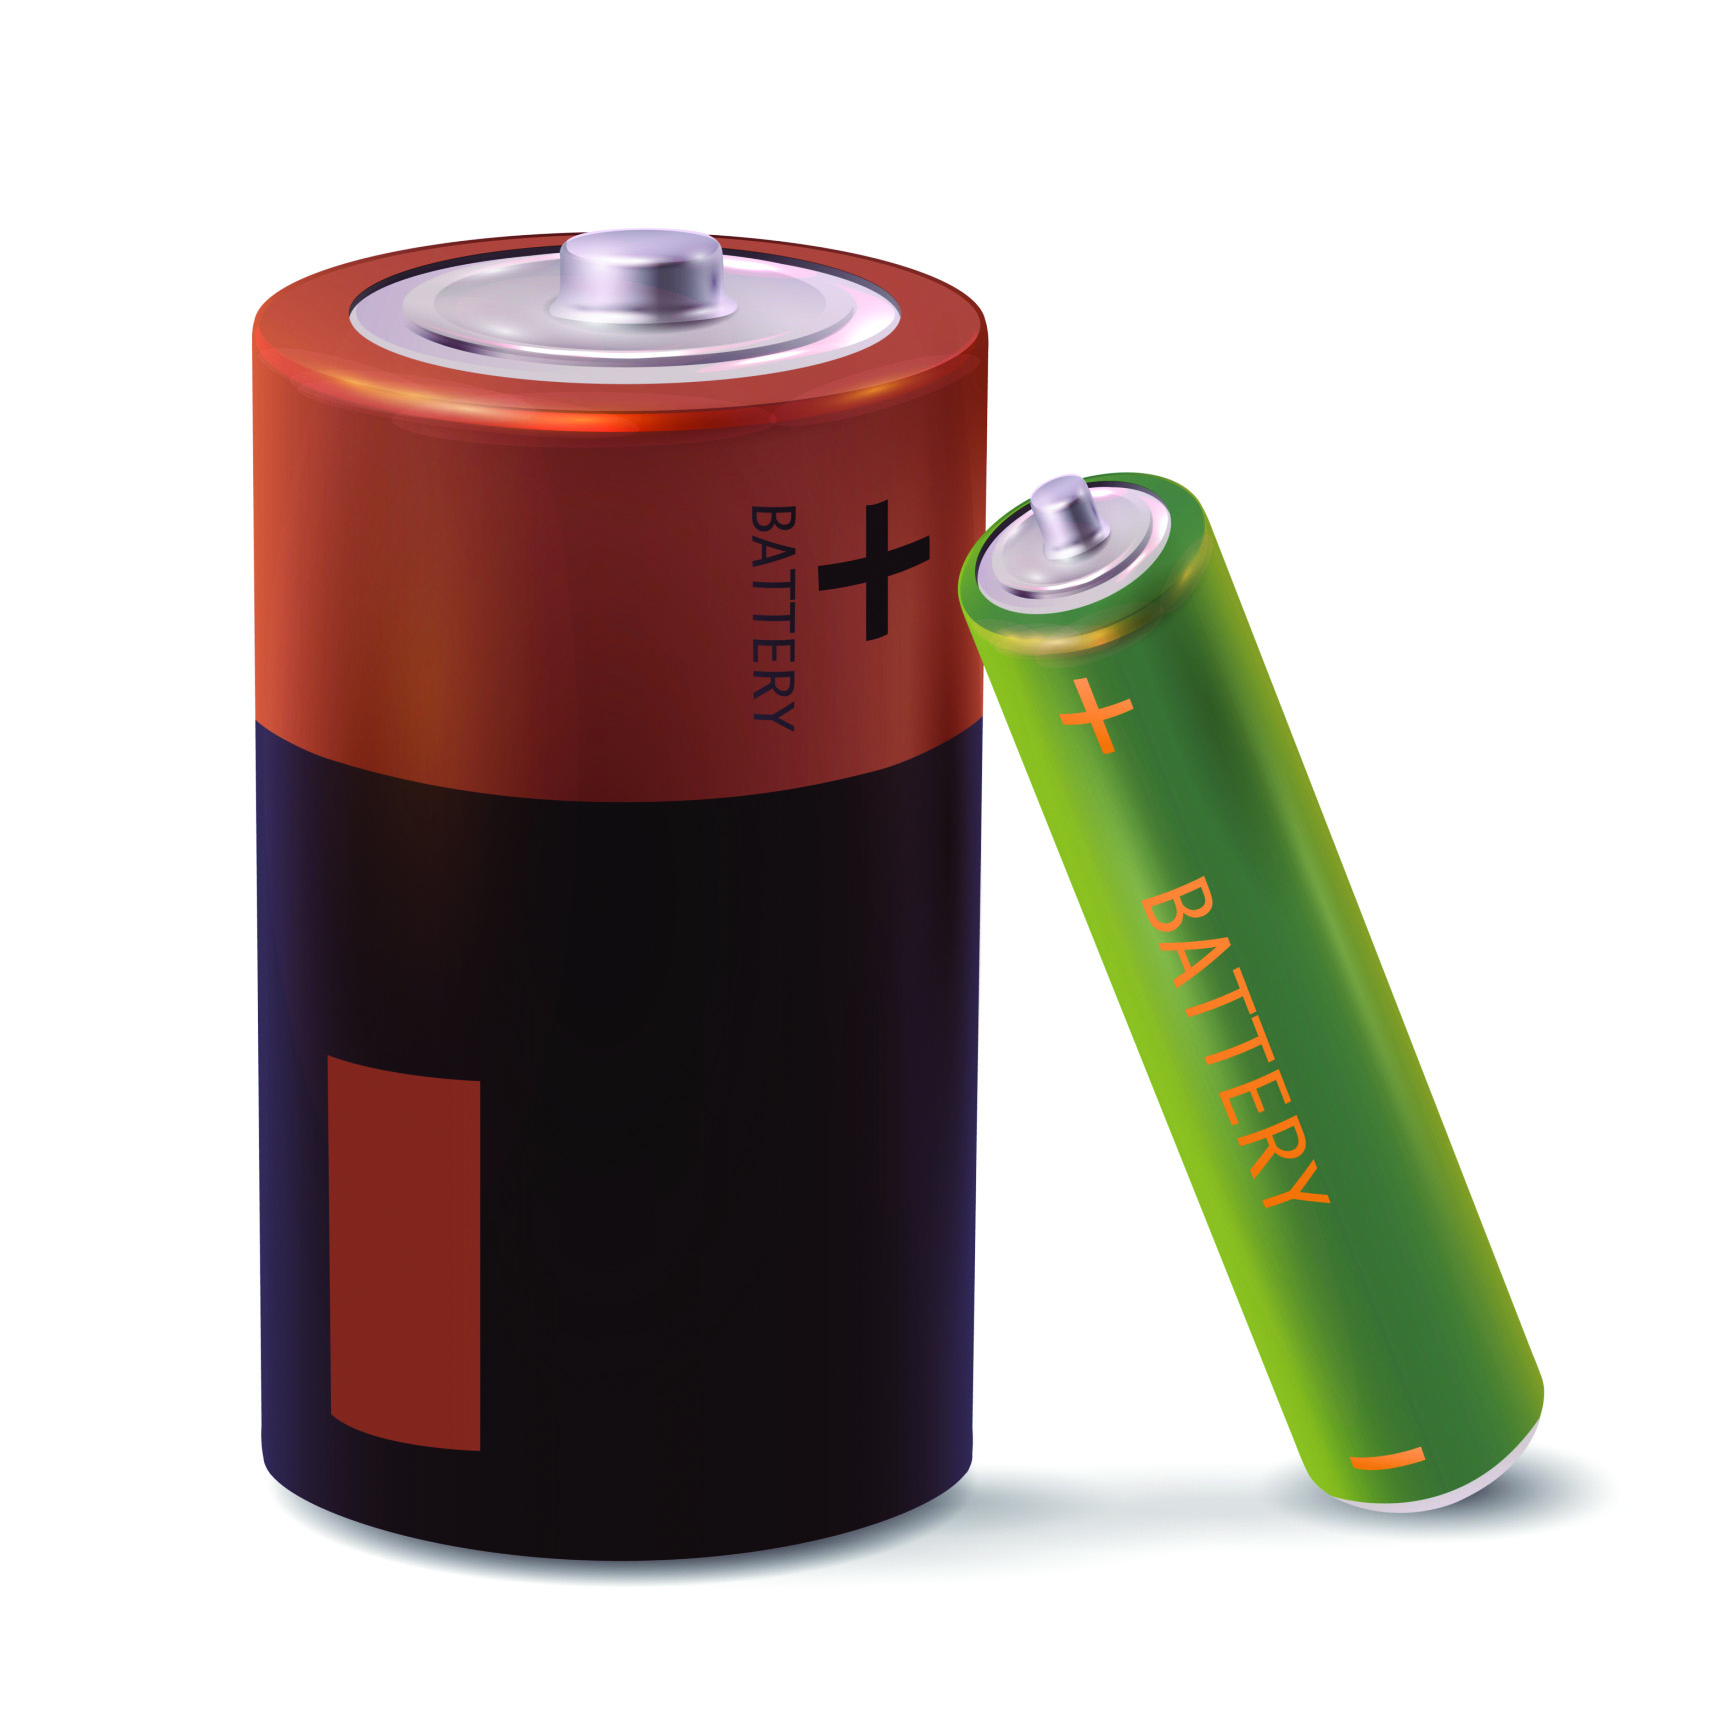 Illustration of two batteries